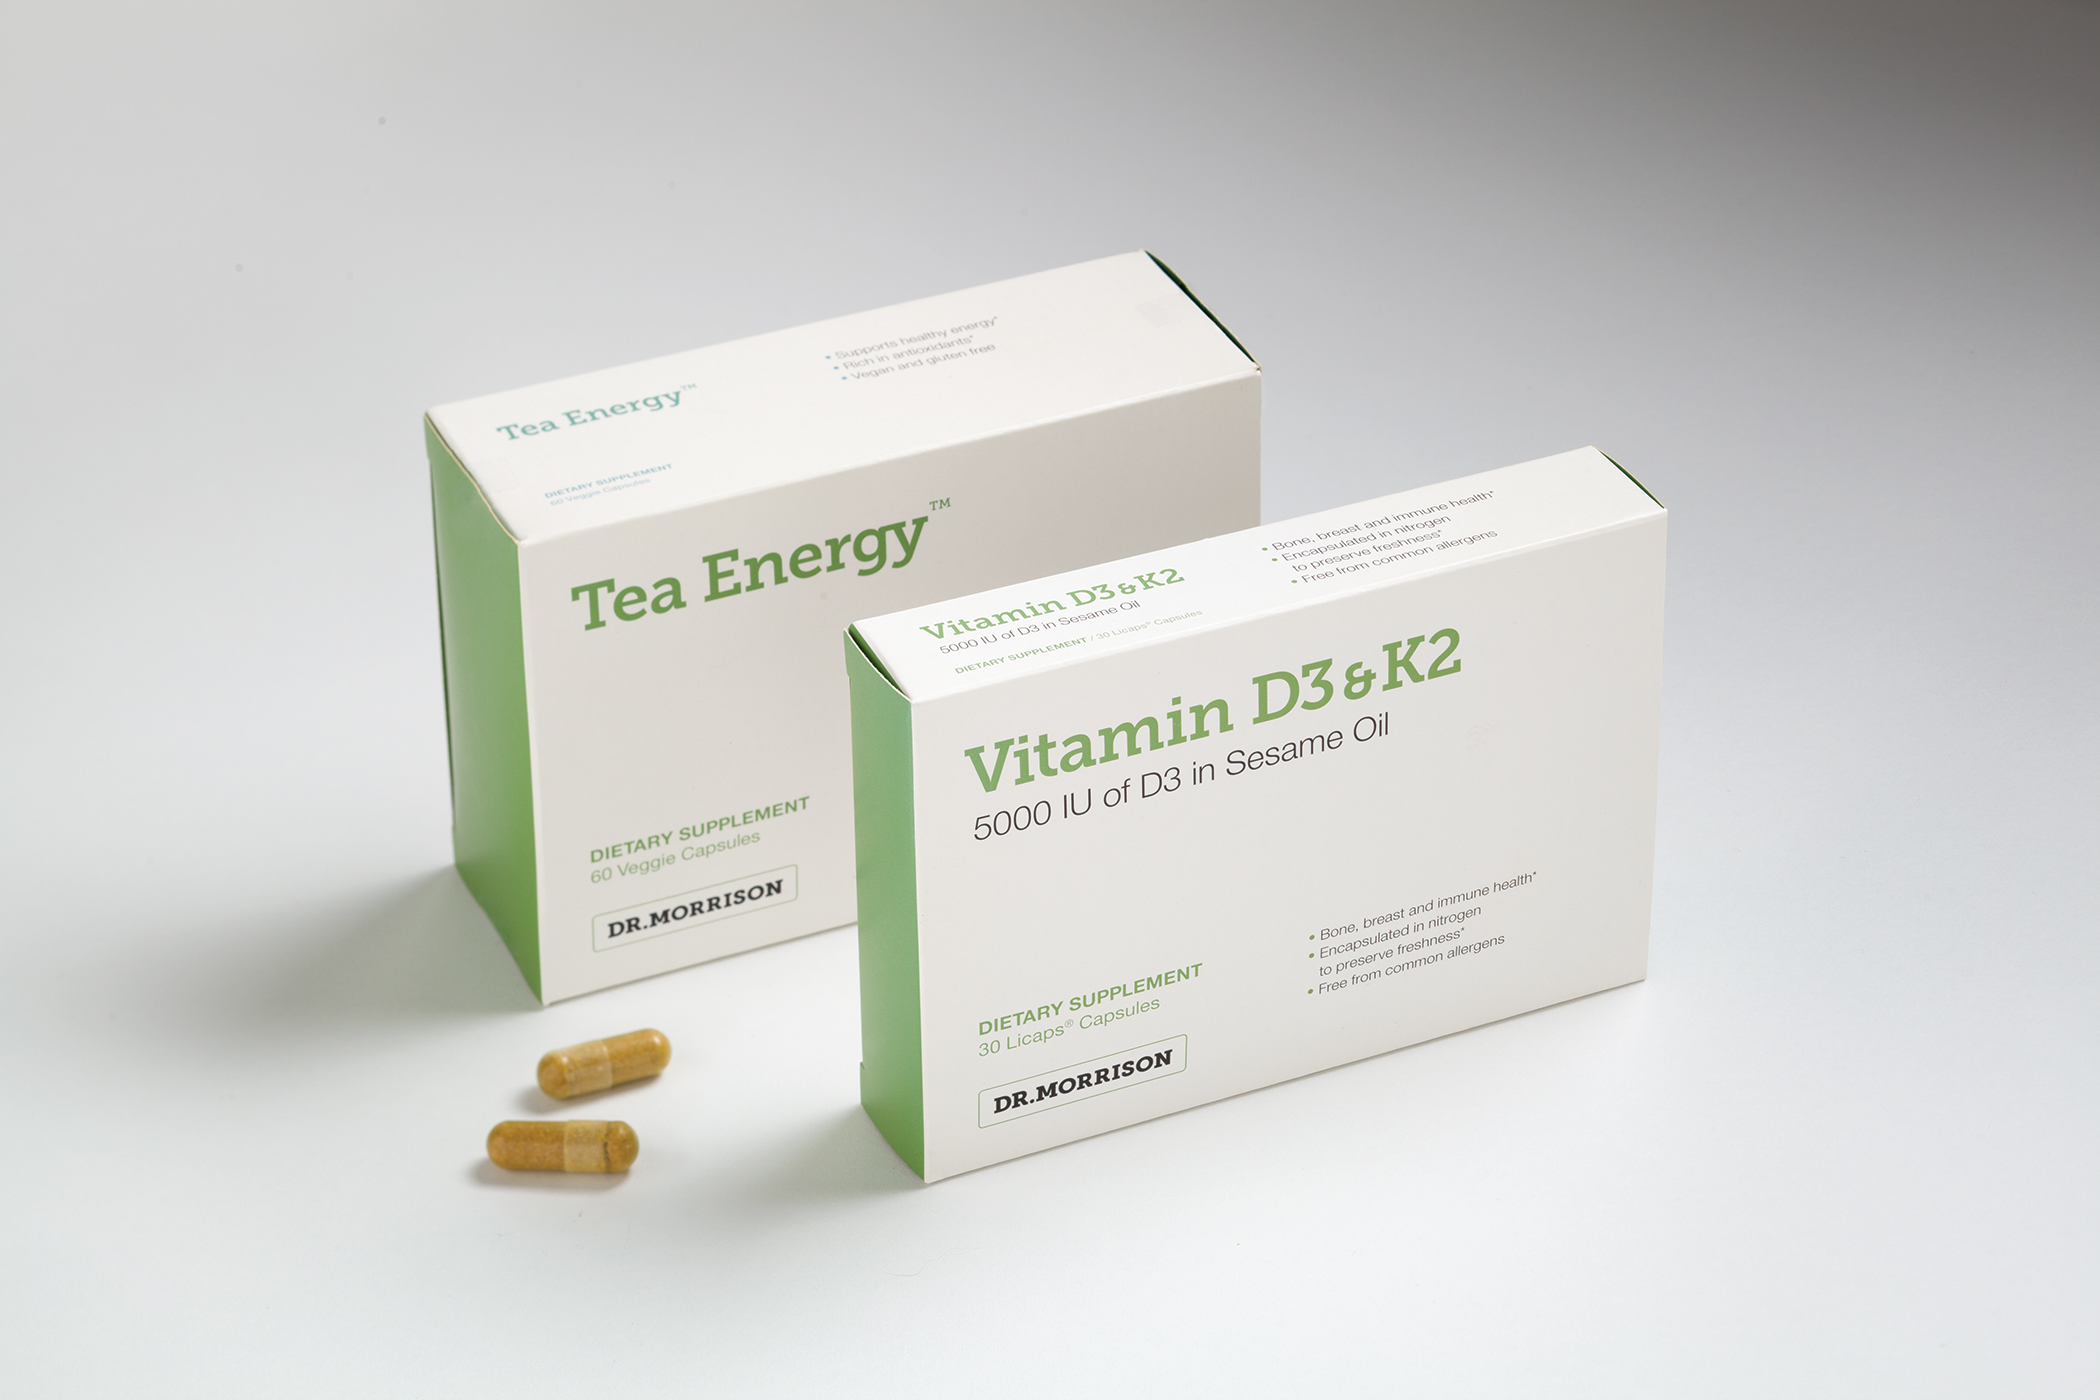 Dr. Morrison Tea Energy and Vitamin D3 and K2 packages and two individual capsules.